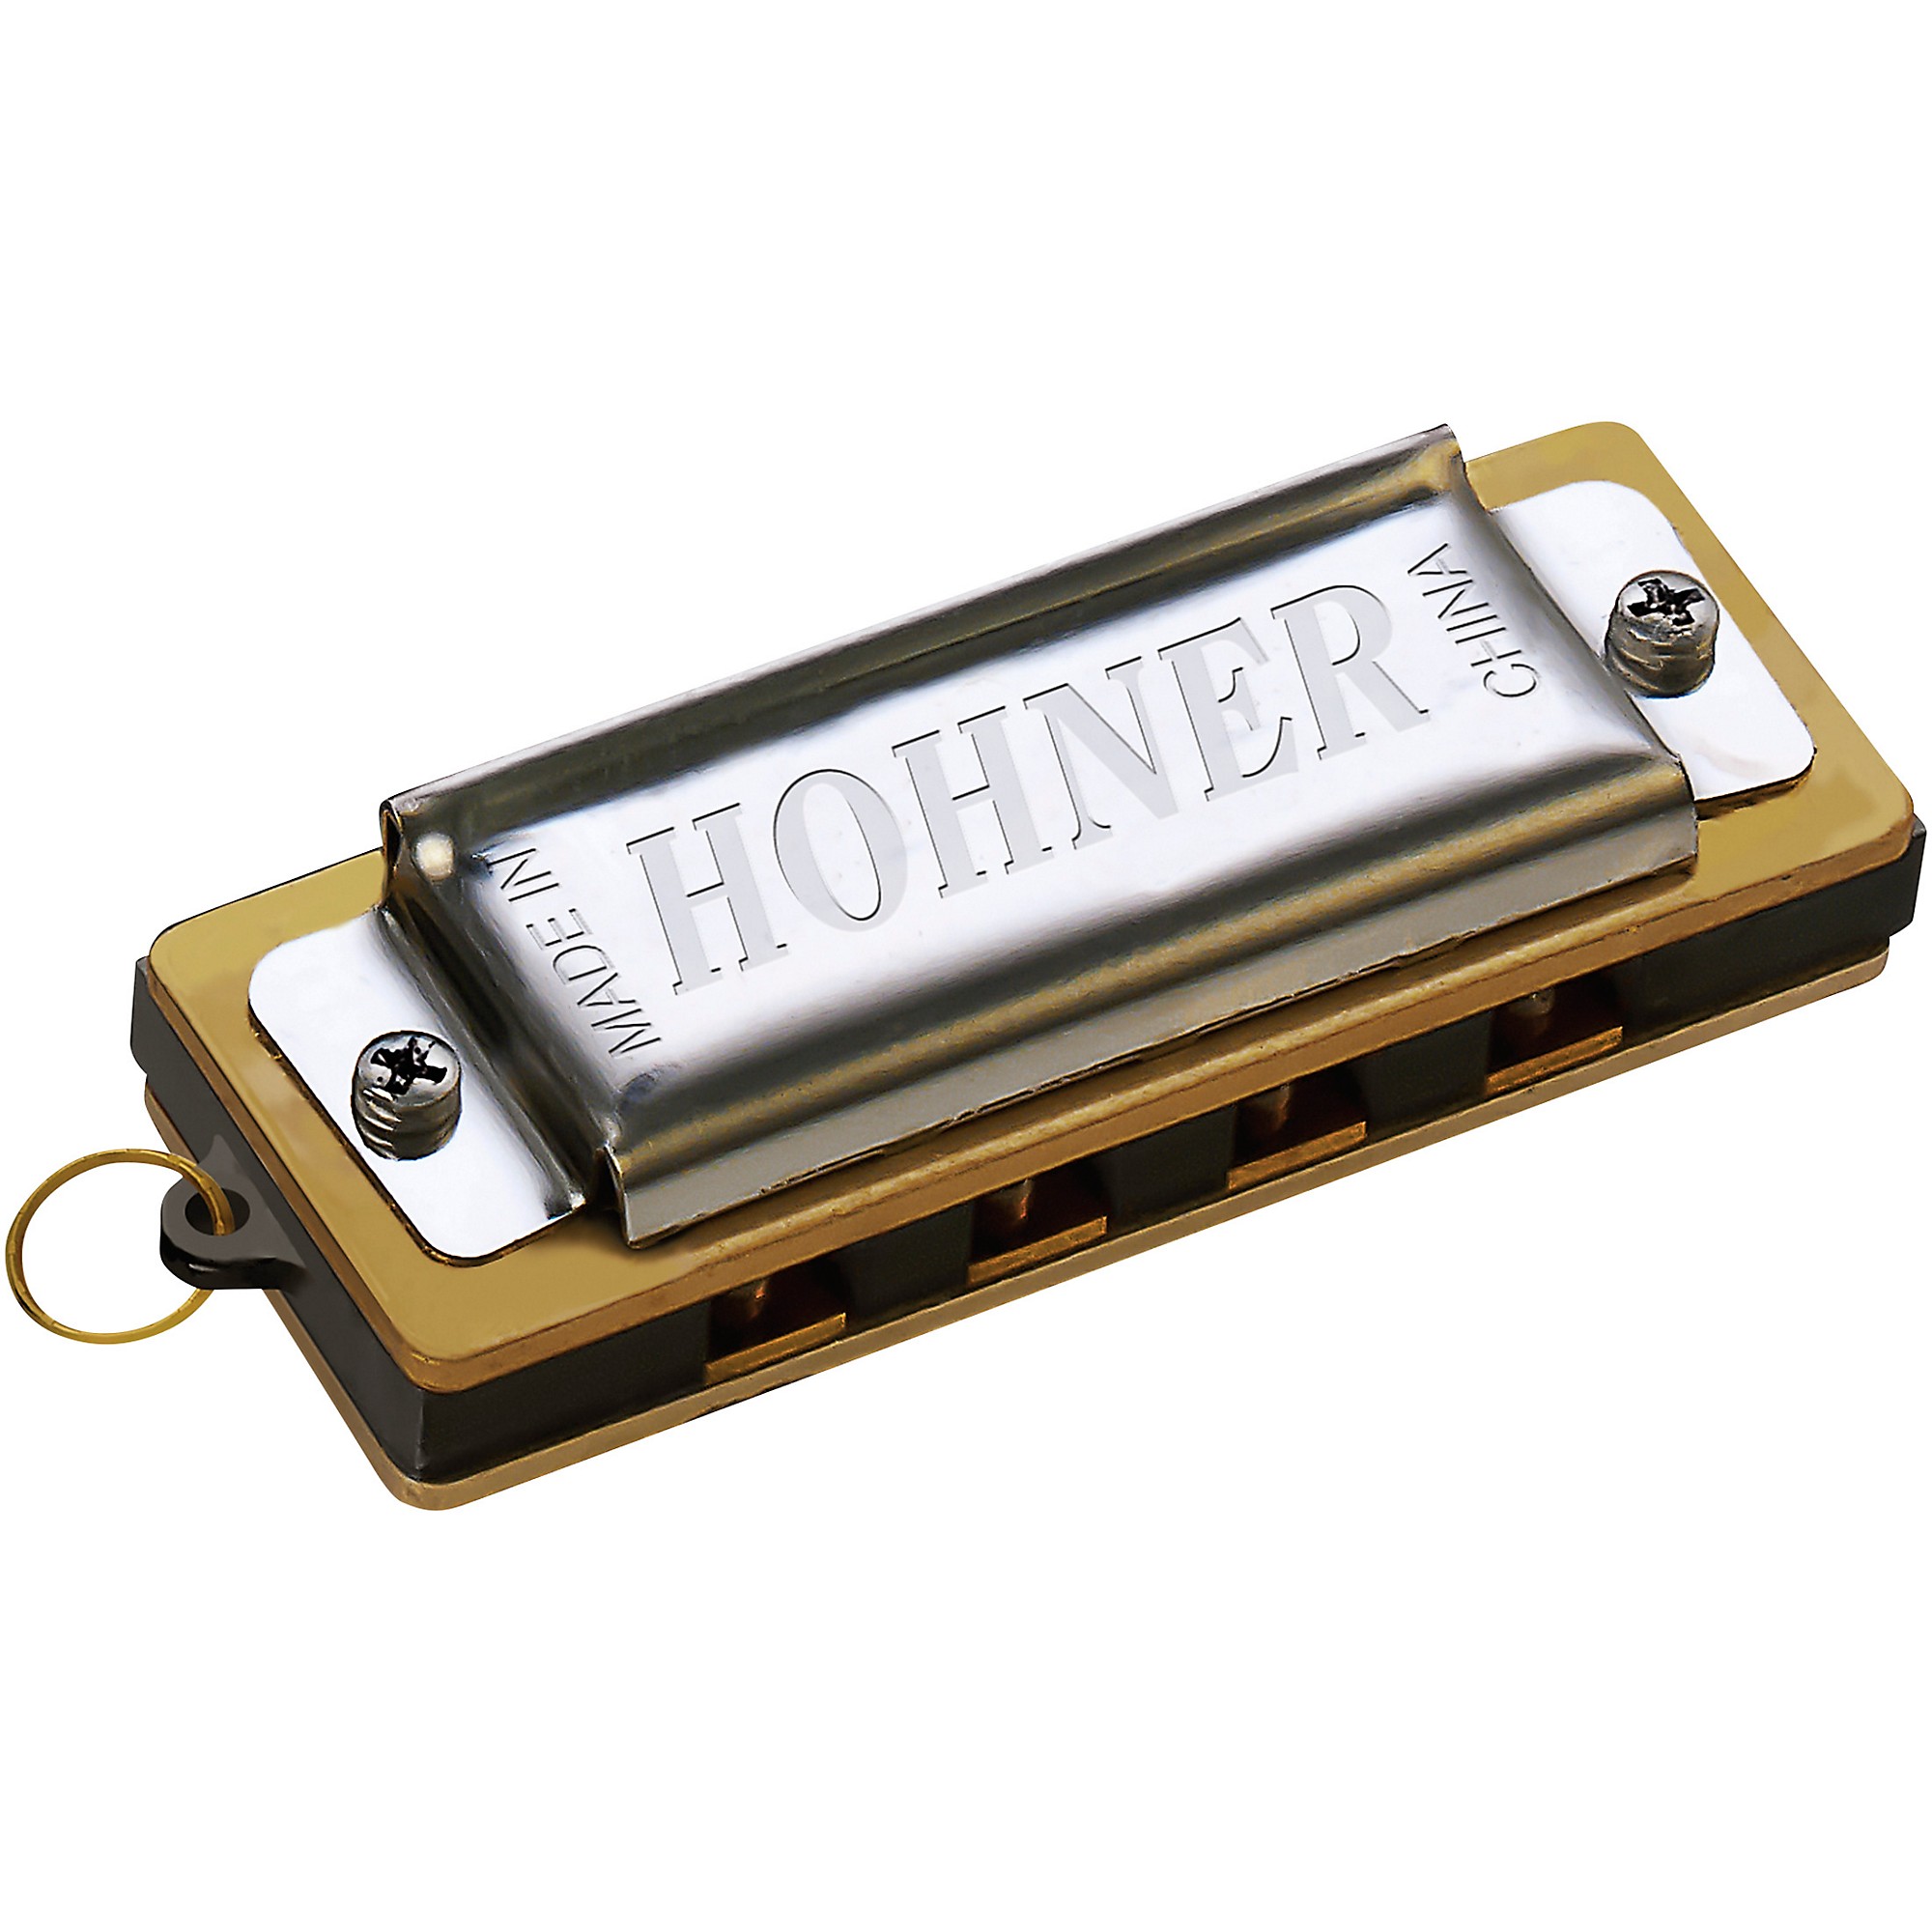 Hohner Special 20 Progressive B with Mini Harmonica Necklace and